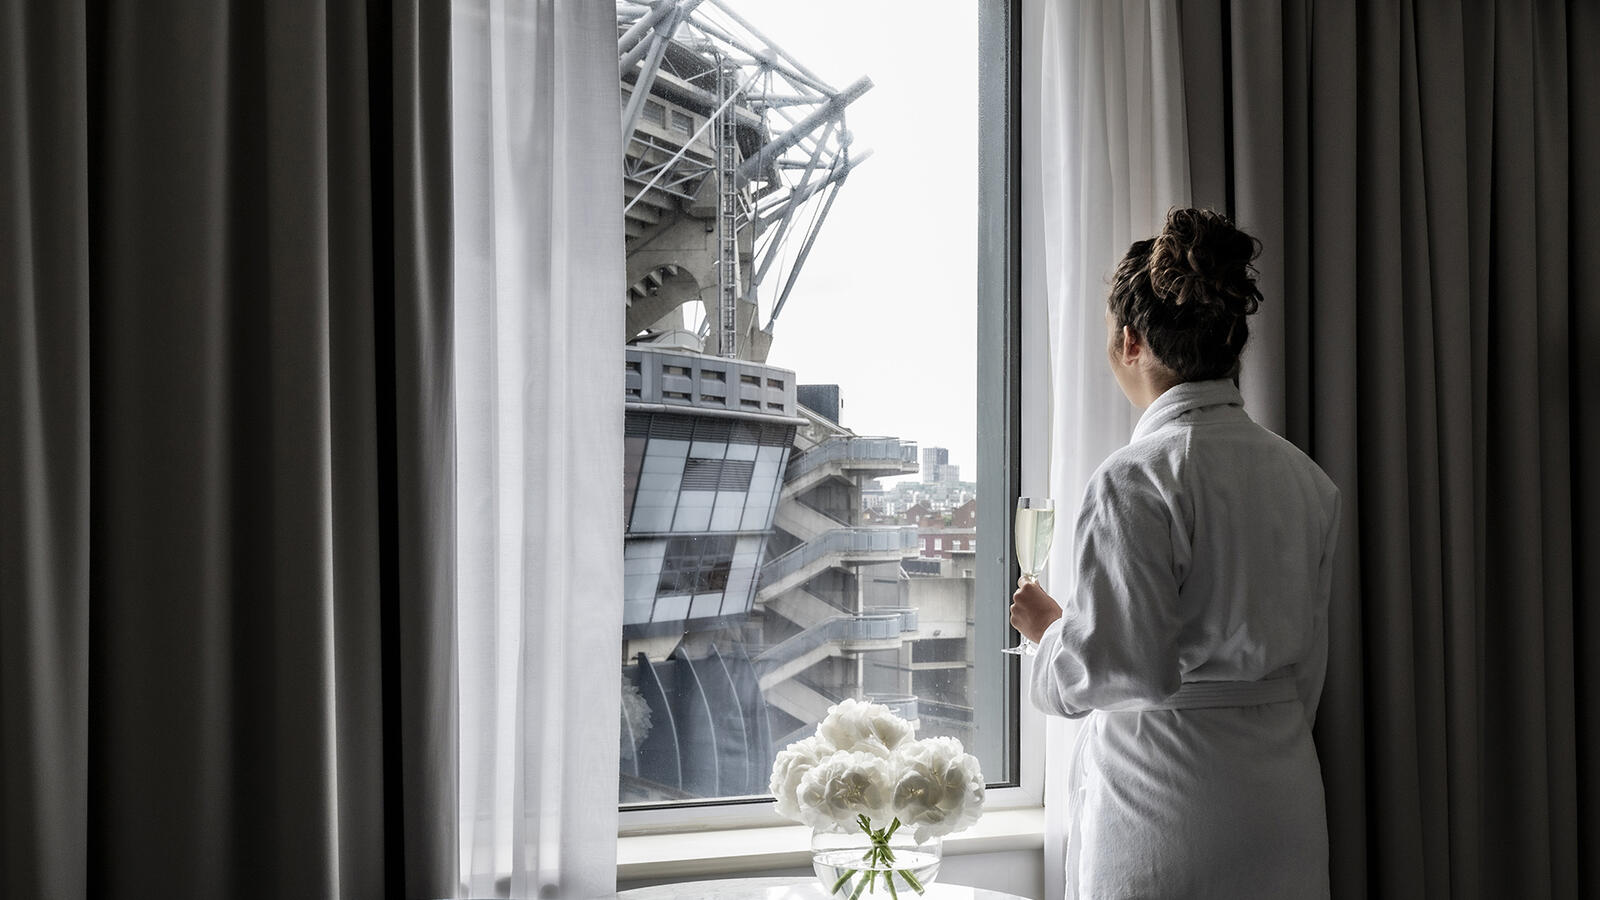 A guest admiring the view of Croke Park stadium